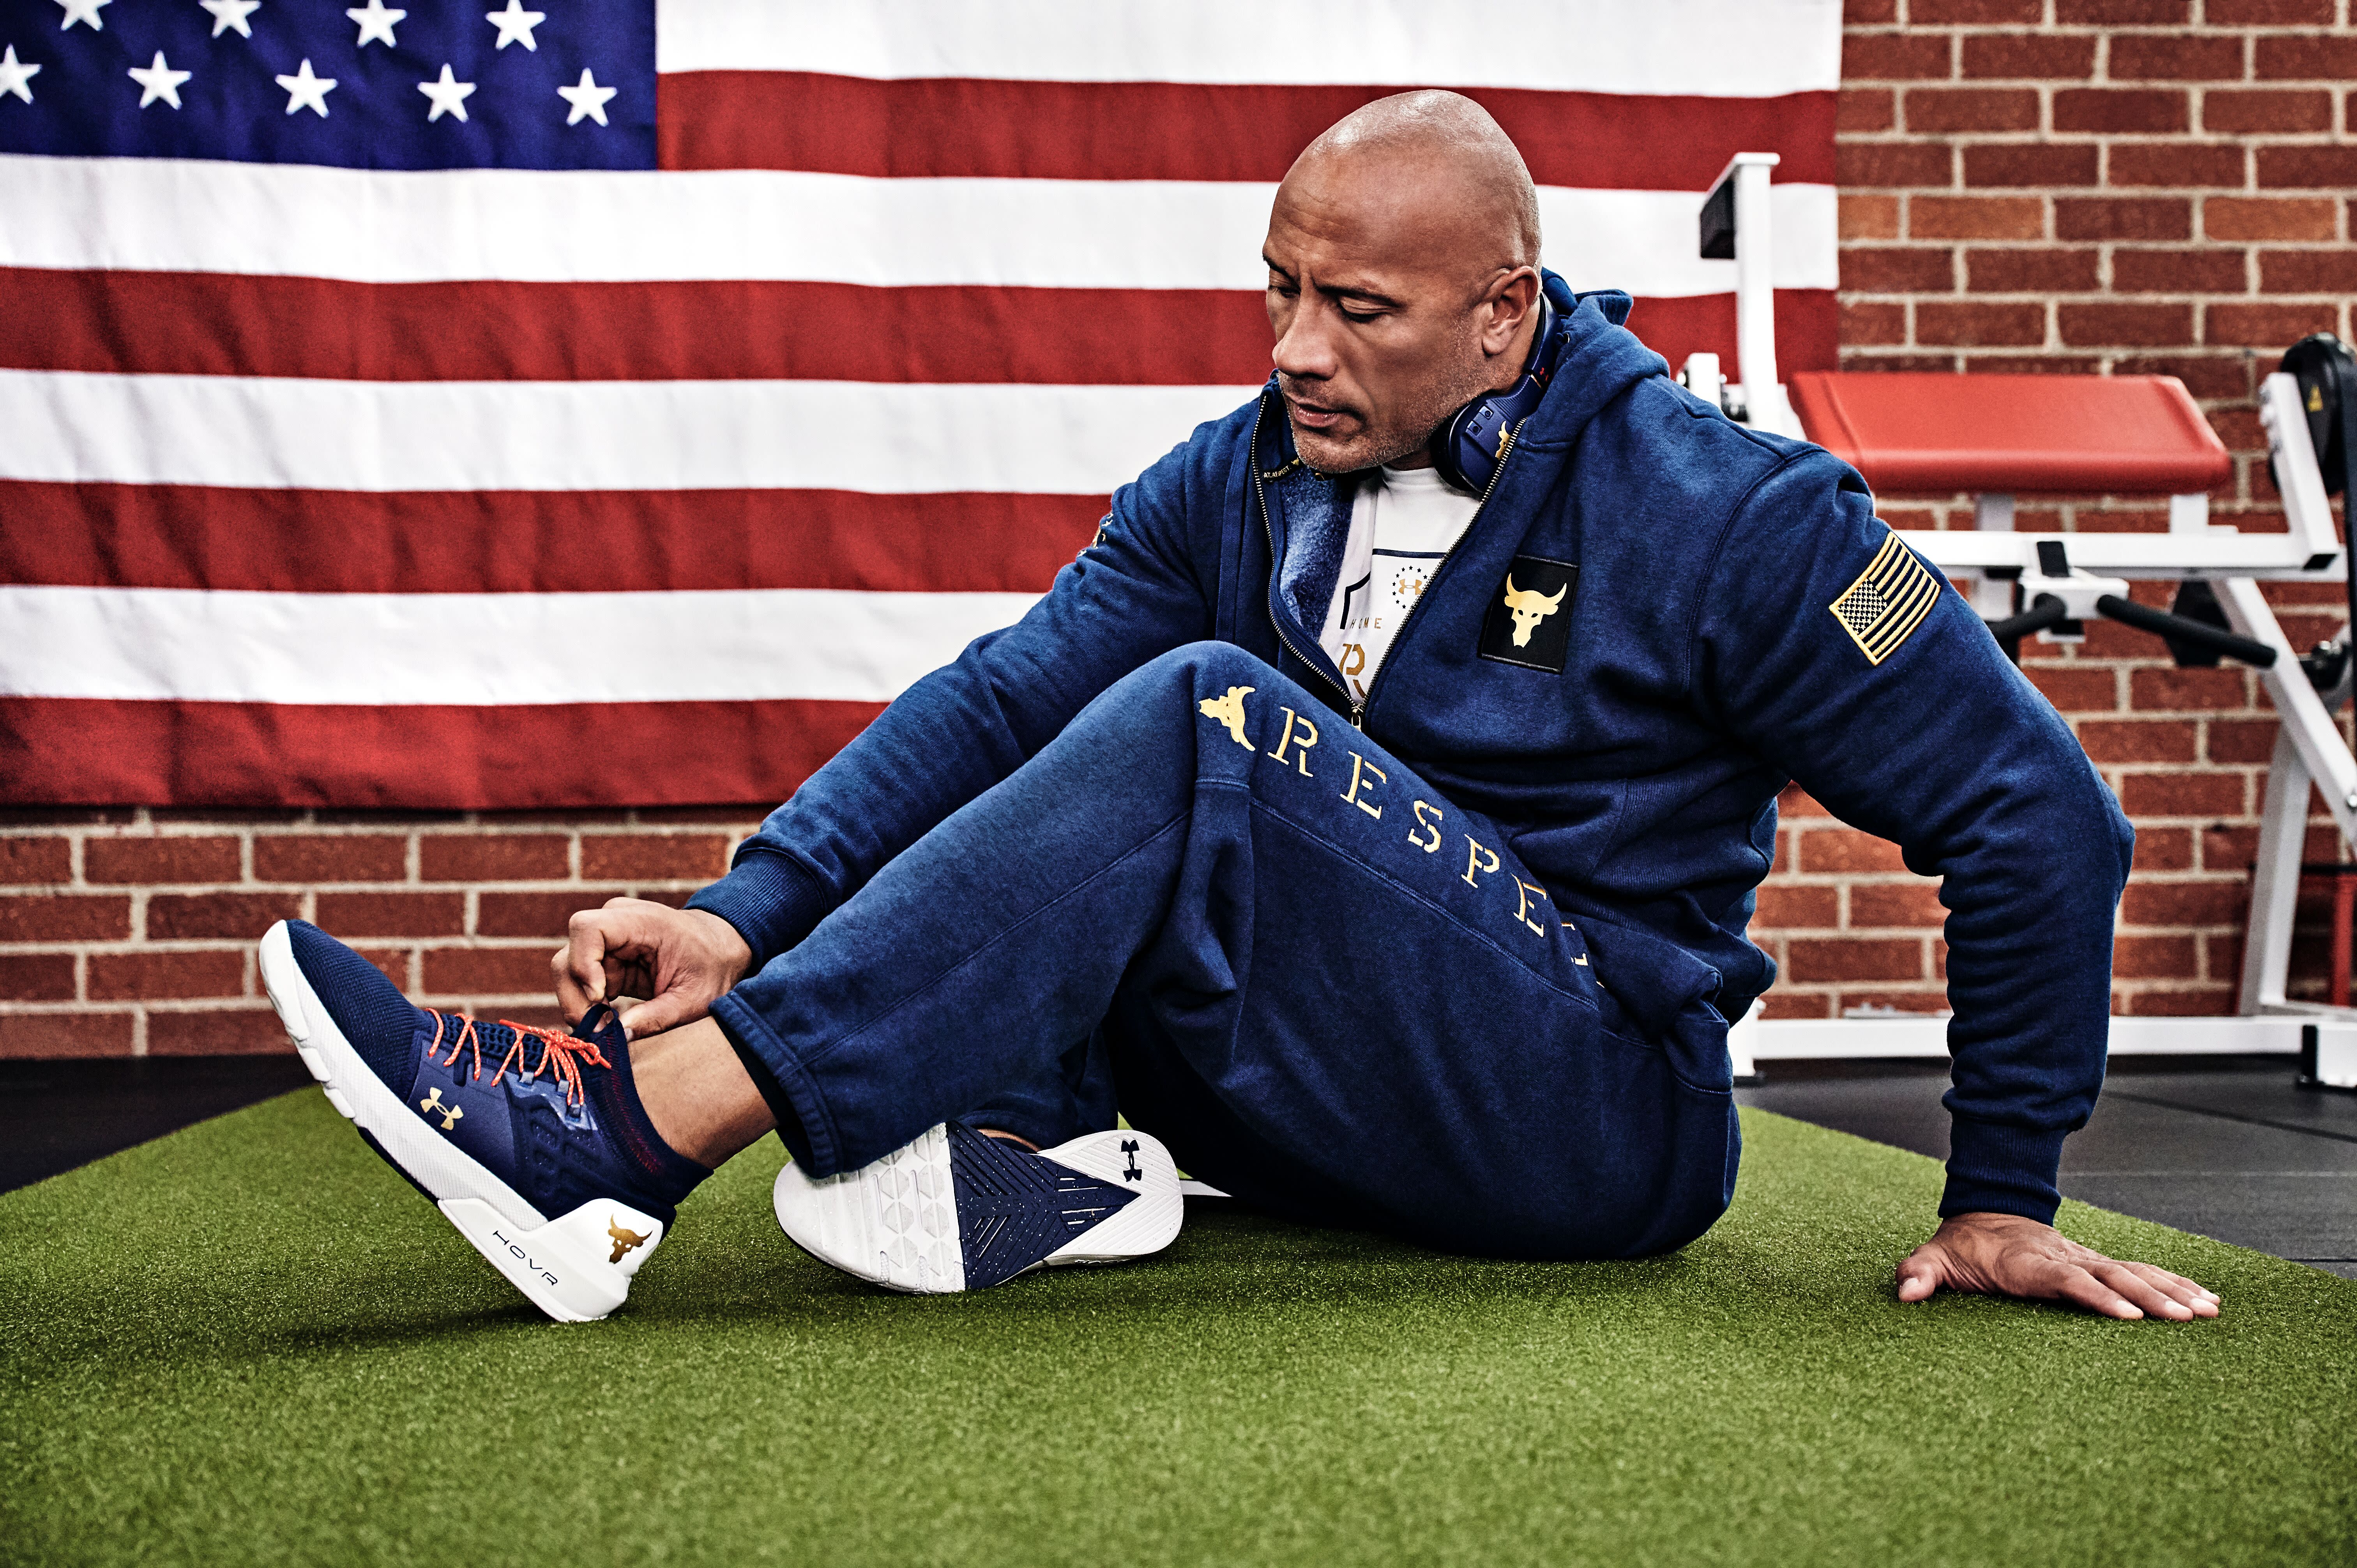 under armour veterans day collection